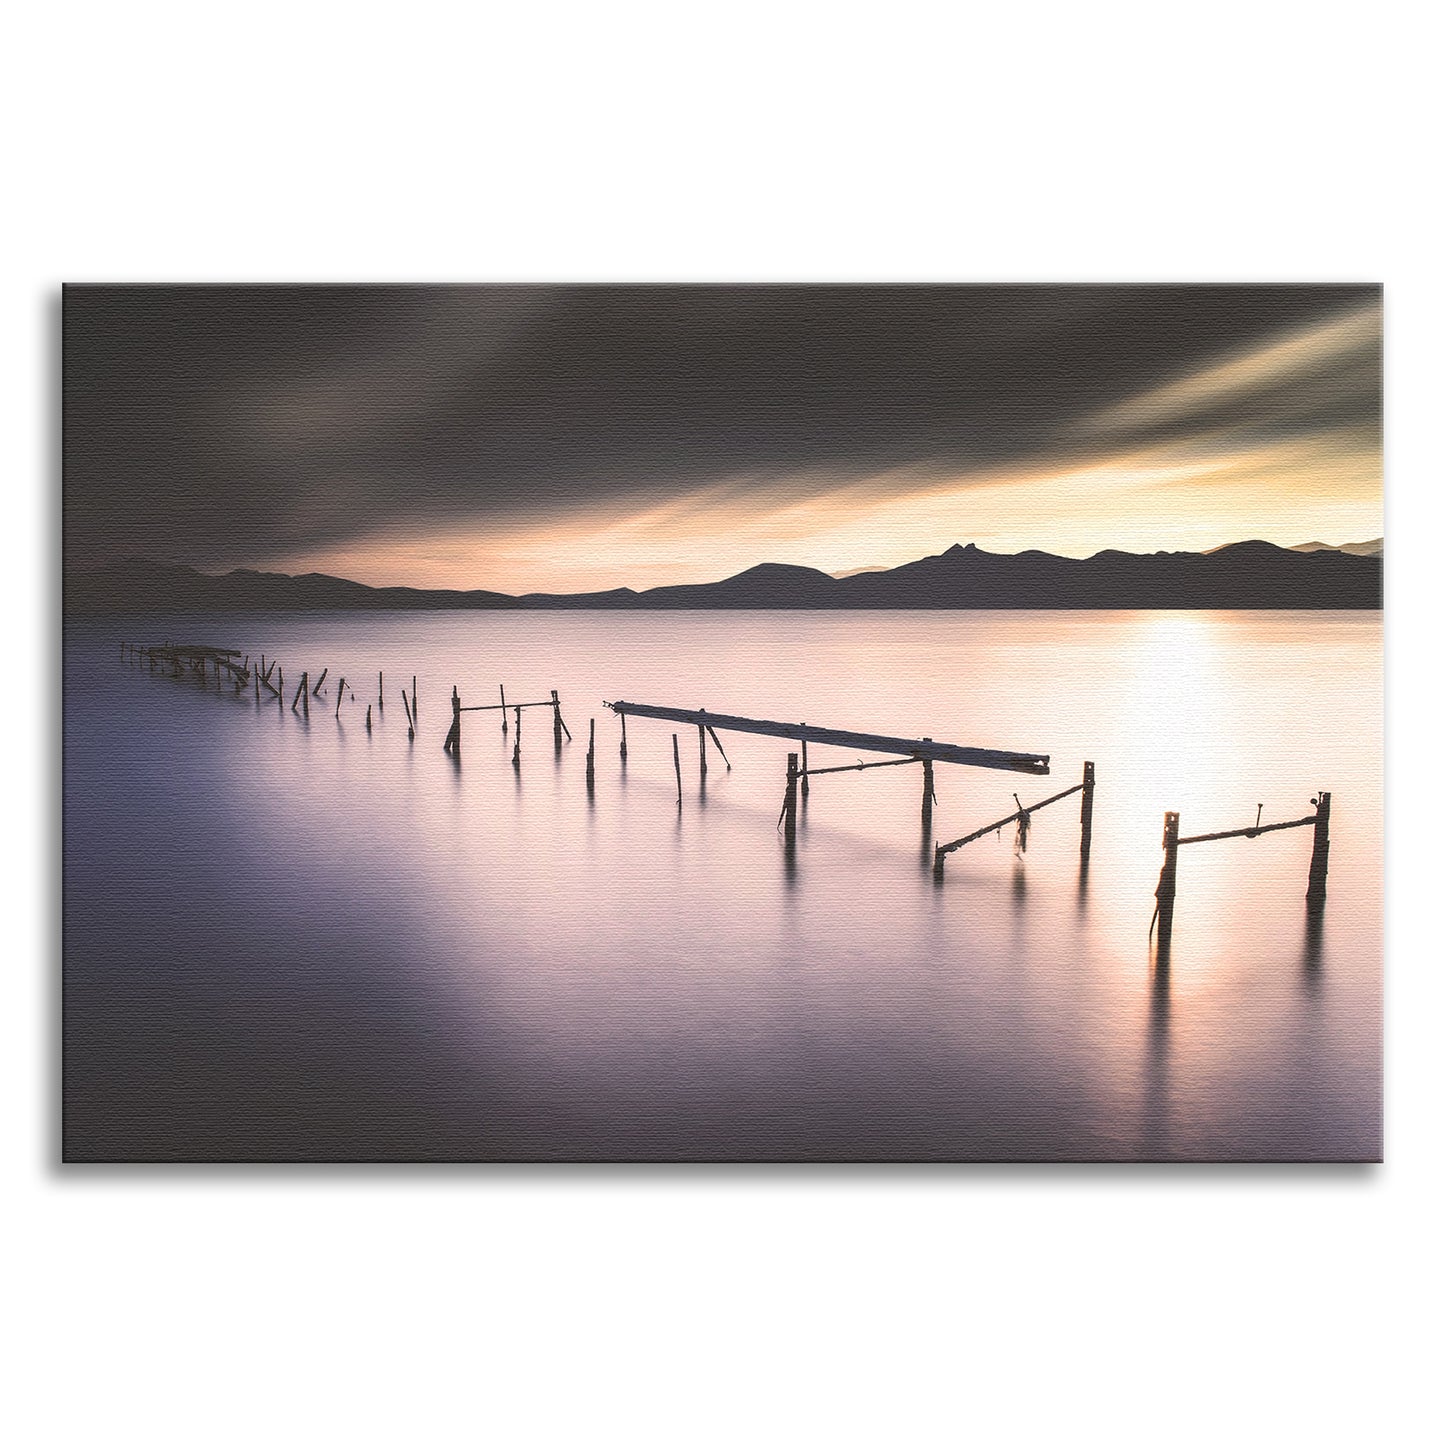 Moody Ruined Pier and Mountain Range Landscape Photo Canvas Wall Art Prints